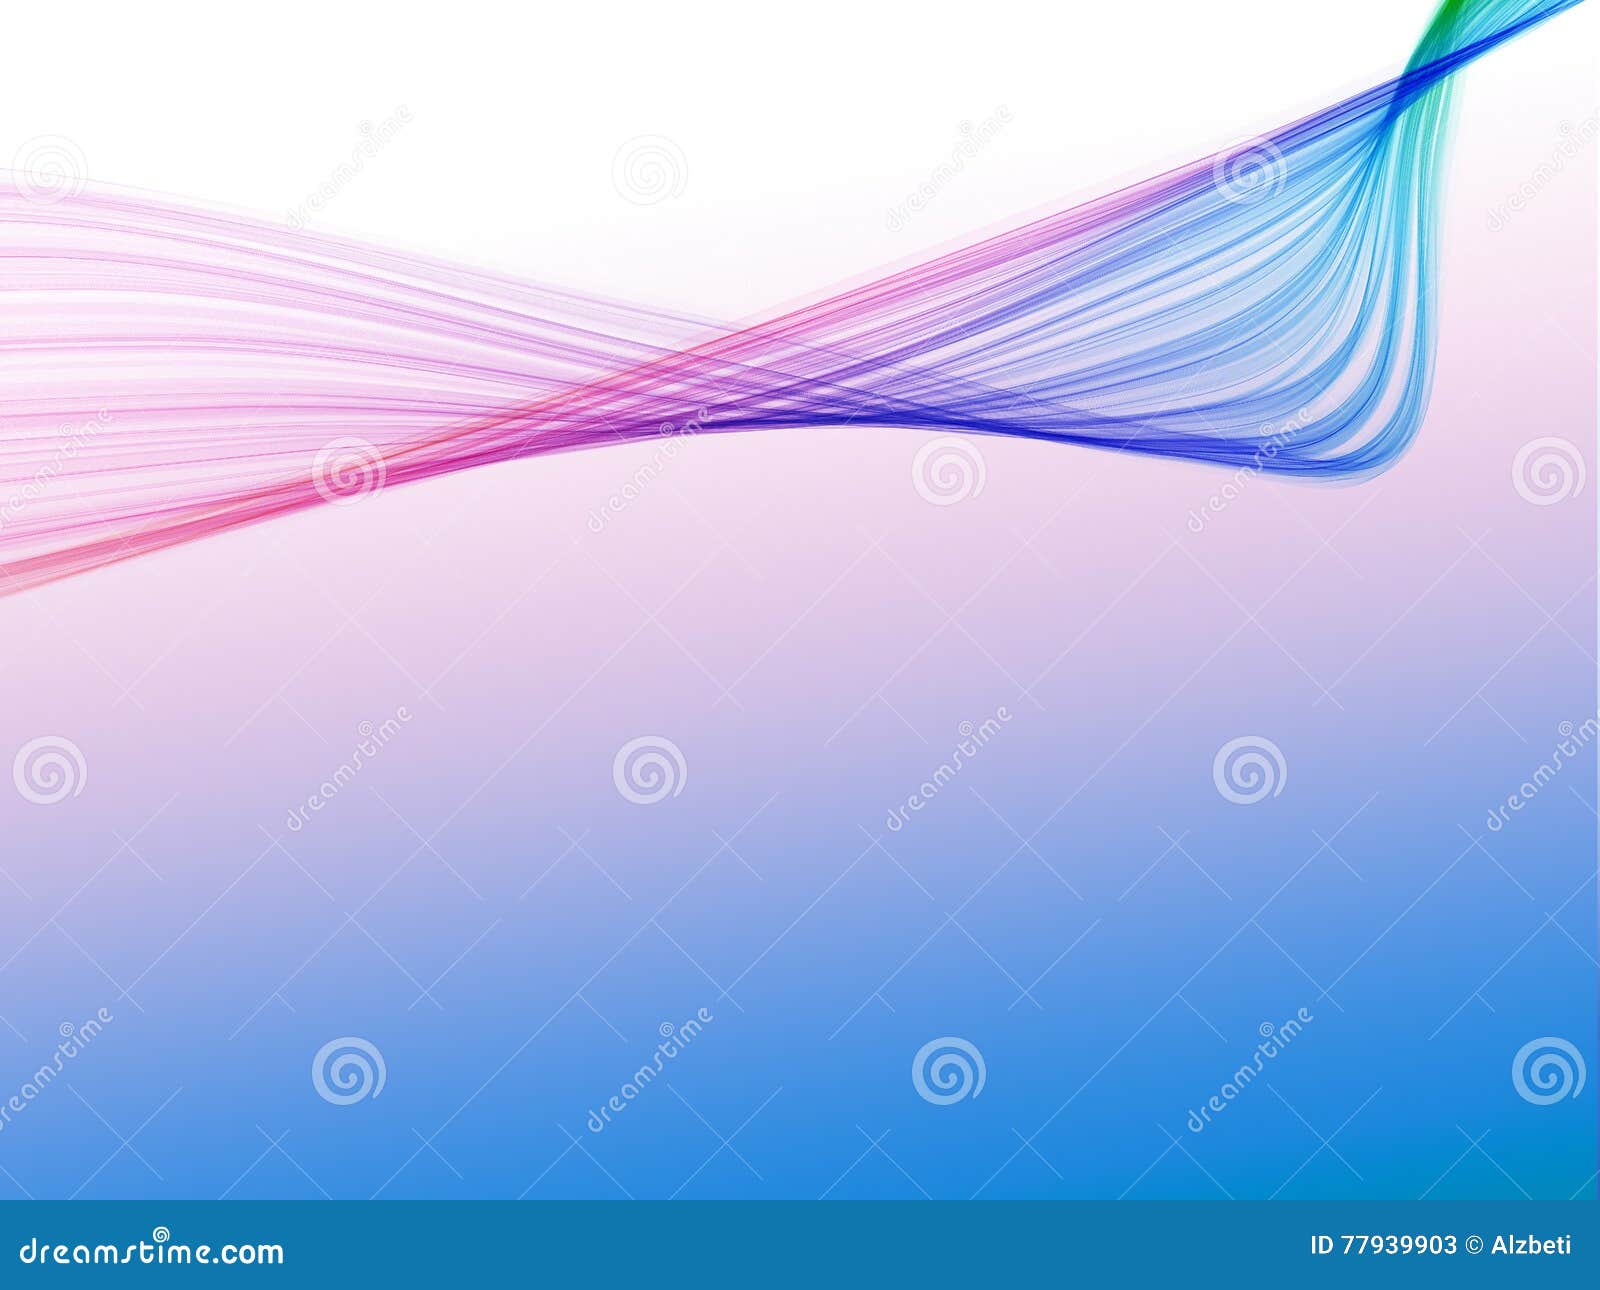 Professional Business Presentation Background Great for Powerpoint Stock  Illustration - Illustration of flame, abstract: 77939903